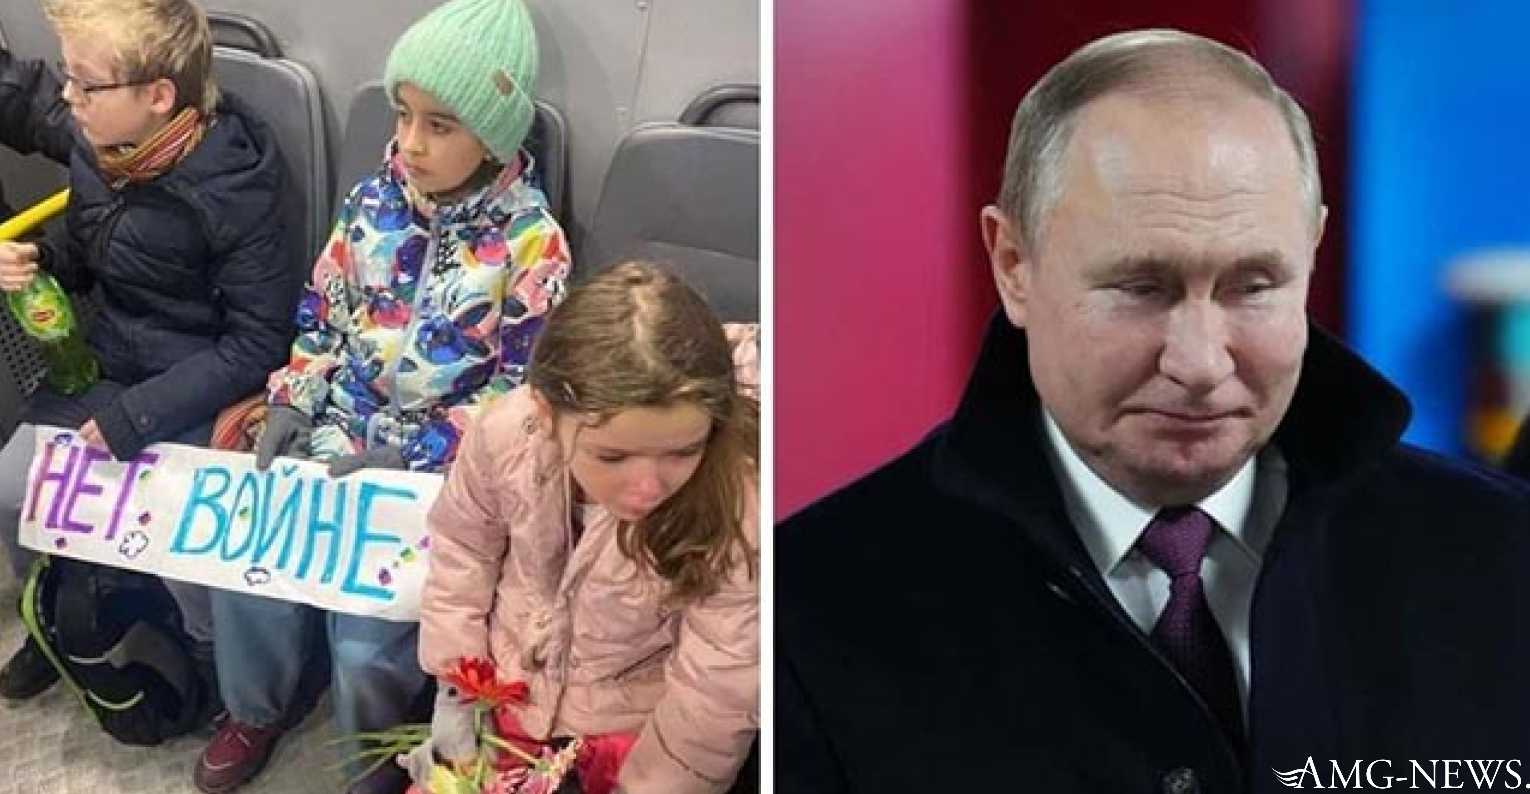 DUMBs: Putin Frees 35,000 Imprisoned Children in Ukraine | Why were the pleas for help by children of Donbass in 2020 ignored by the mainstream media? - American Media Group